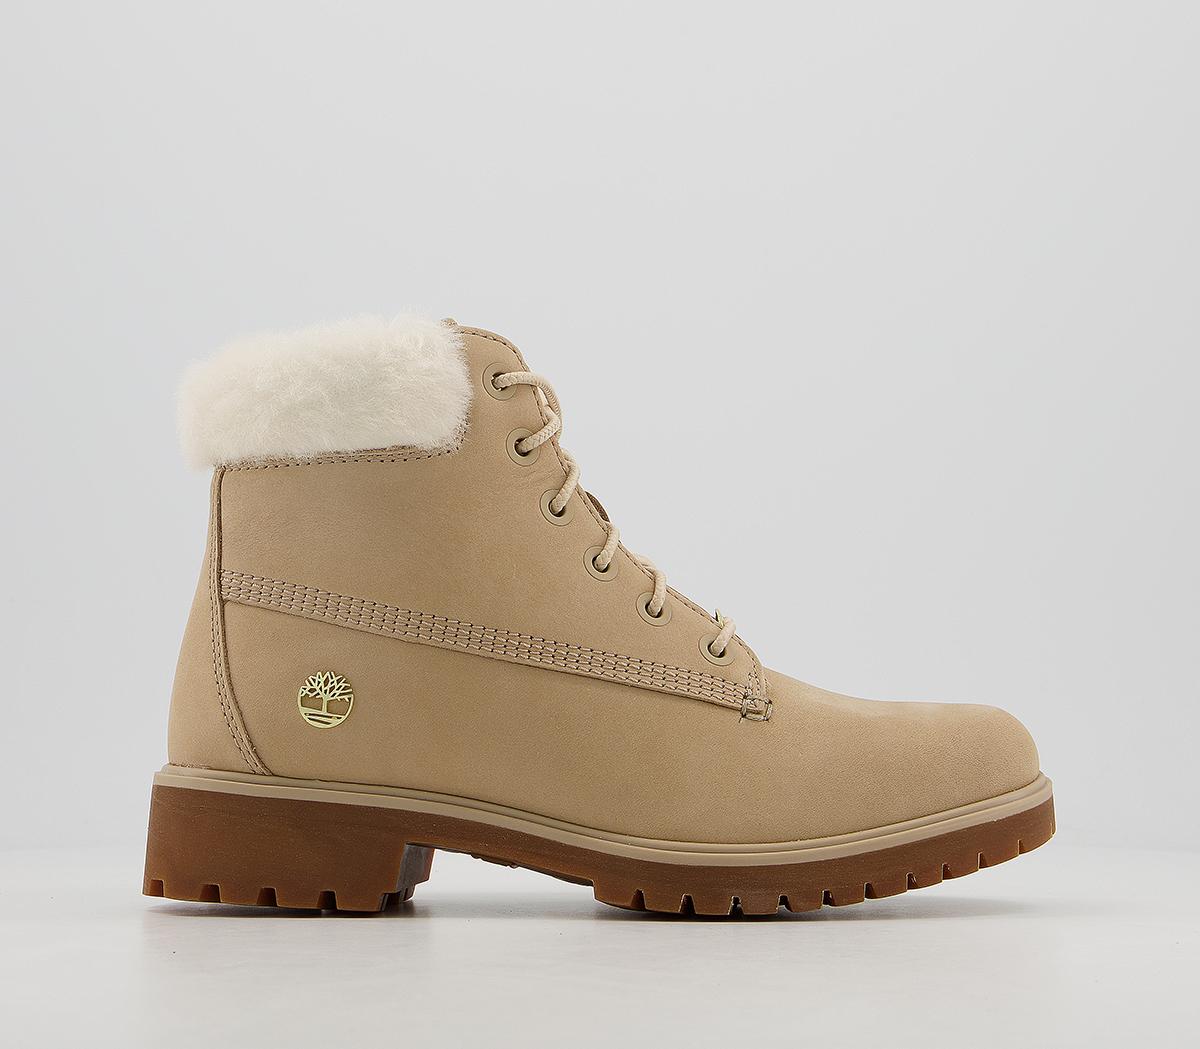 Timberland Slim Premium 6 Inch Fur Cuff Boots Stone Exclusive - Ankle Boots